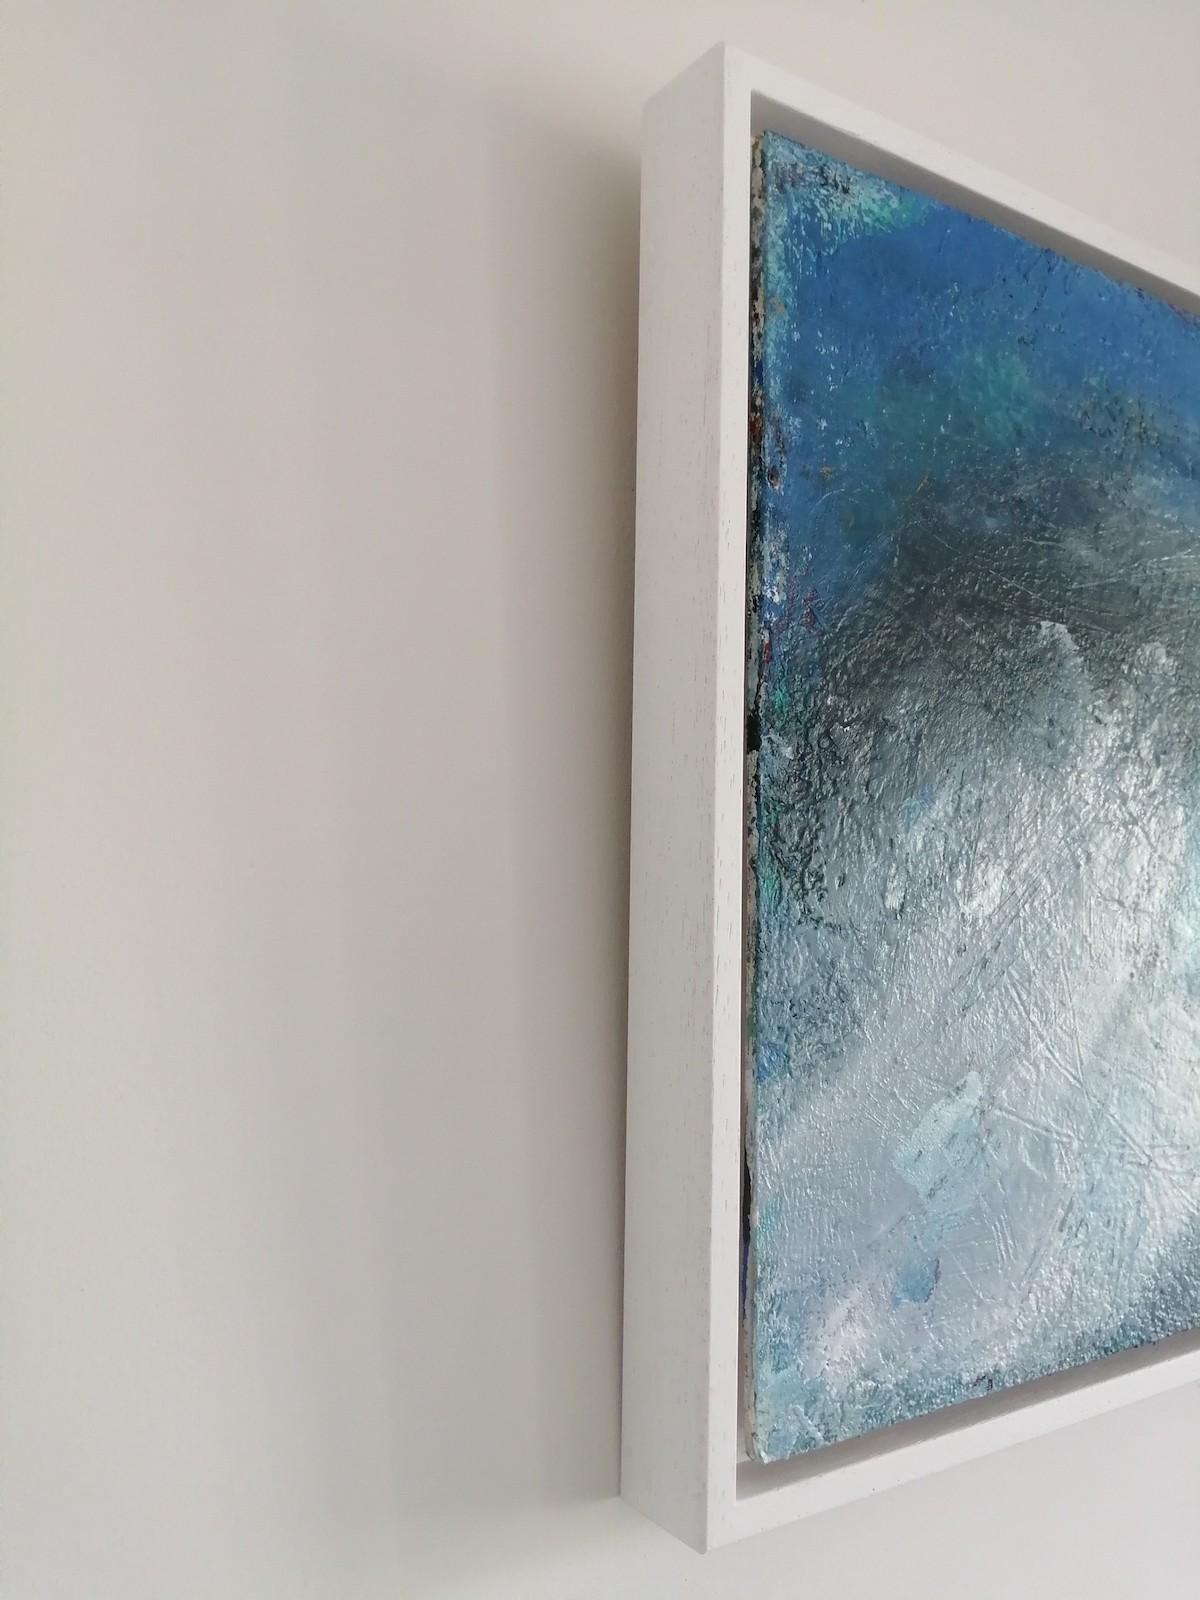 Cornish Blue by Mary Scott
Hand signed by the artist 
Original Semi Abstract Painting
Acrylic Paint on Board
Board size H 30 cm x W 30 cm x D 0.5 cm
Framed size H 33 cm x W 33 cm x D 3 cm
Sold Framed in a White Wood Float Frame
Free Shipping
Please